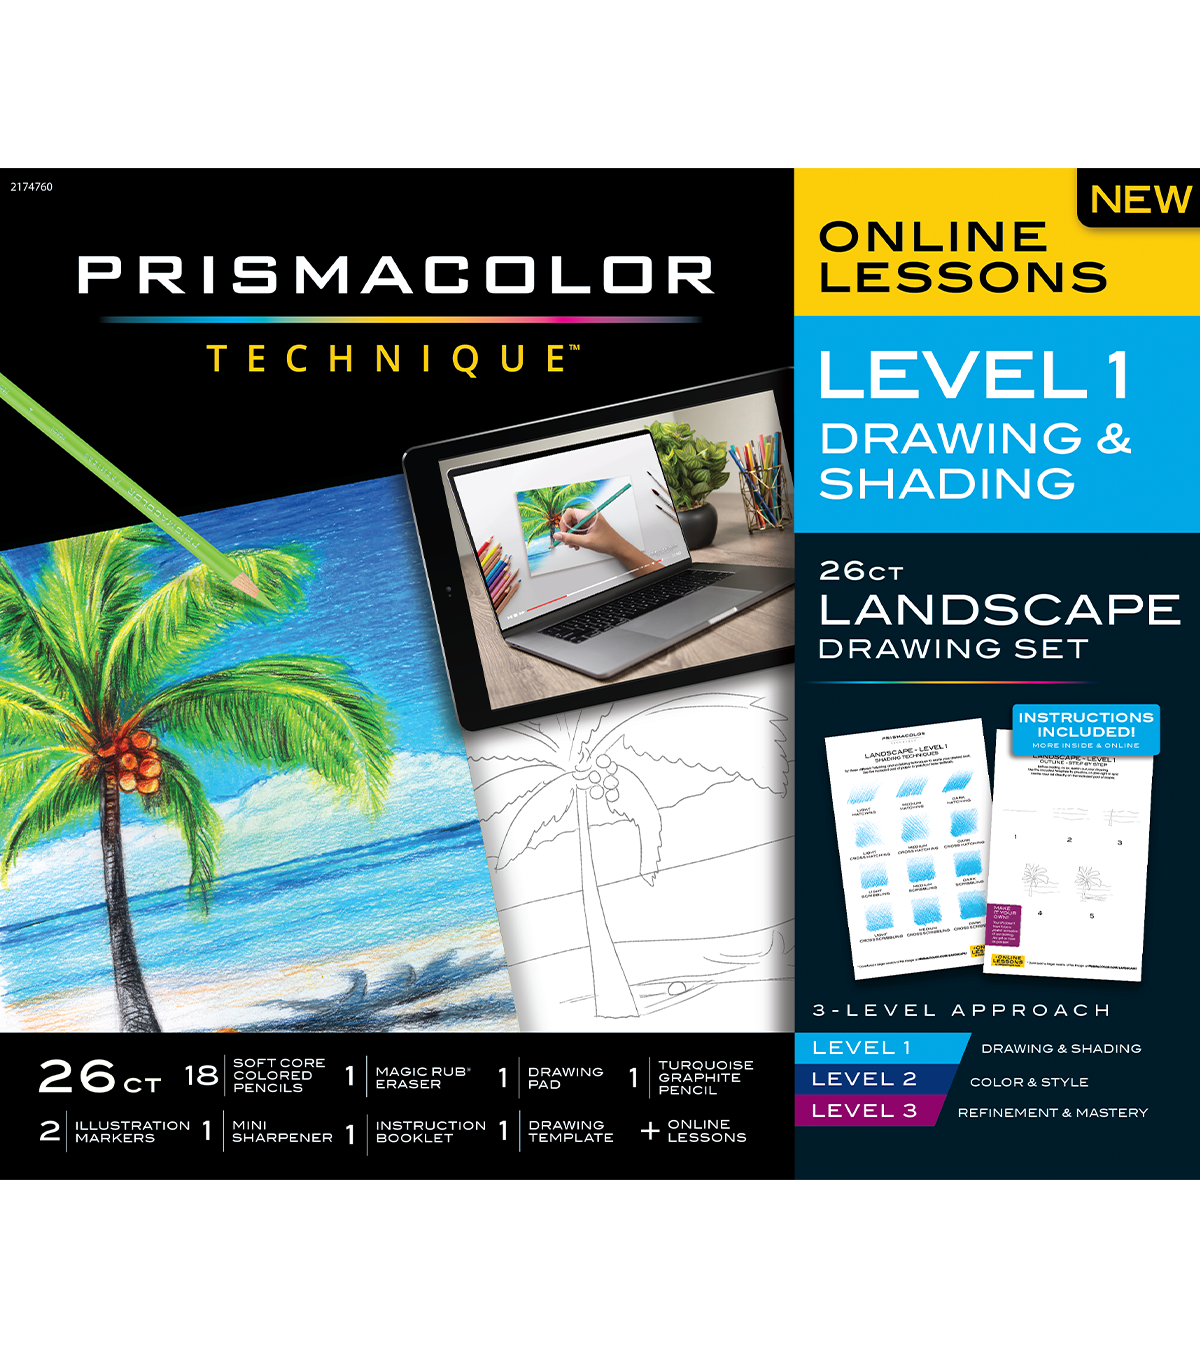 packaging for online lessons level 1 drawing and shading, 26 count landscape drawing set